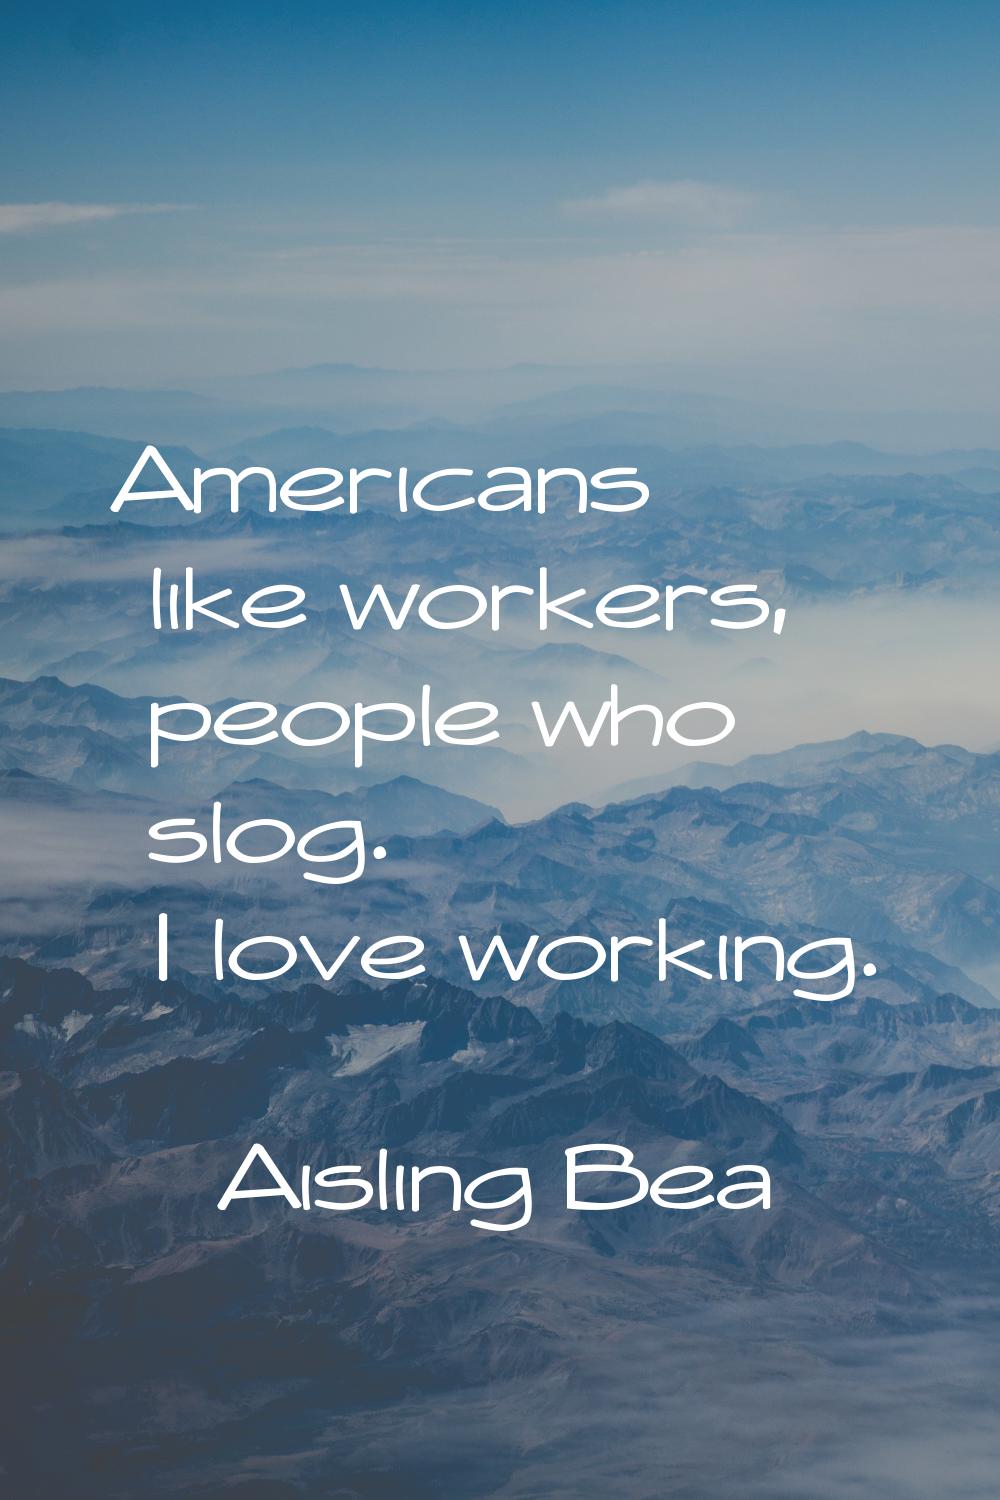 Americans like workers, people who slog. I love working.